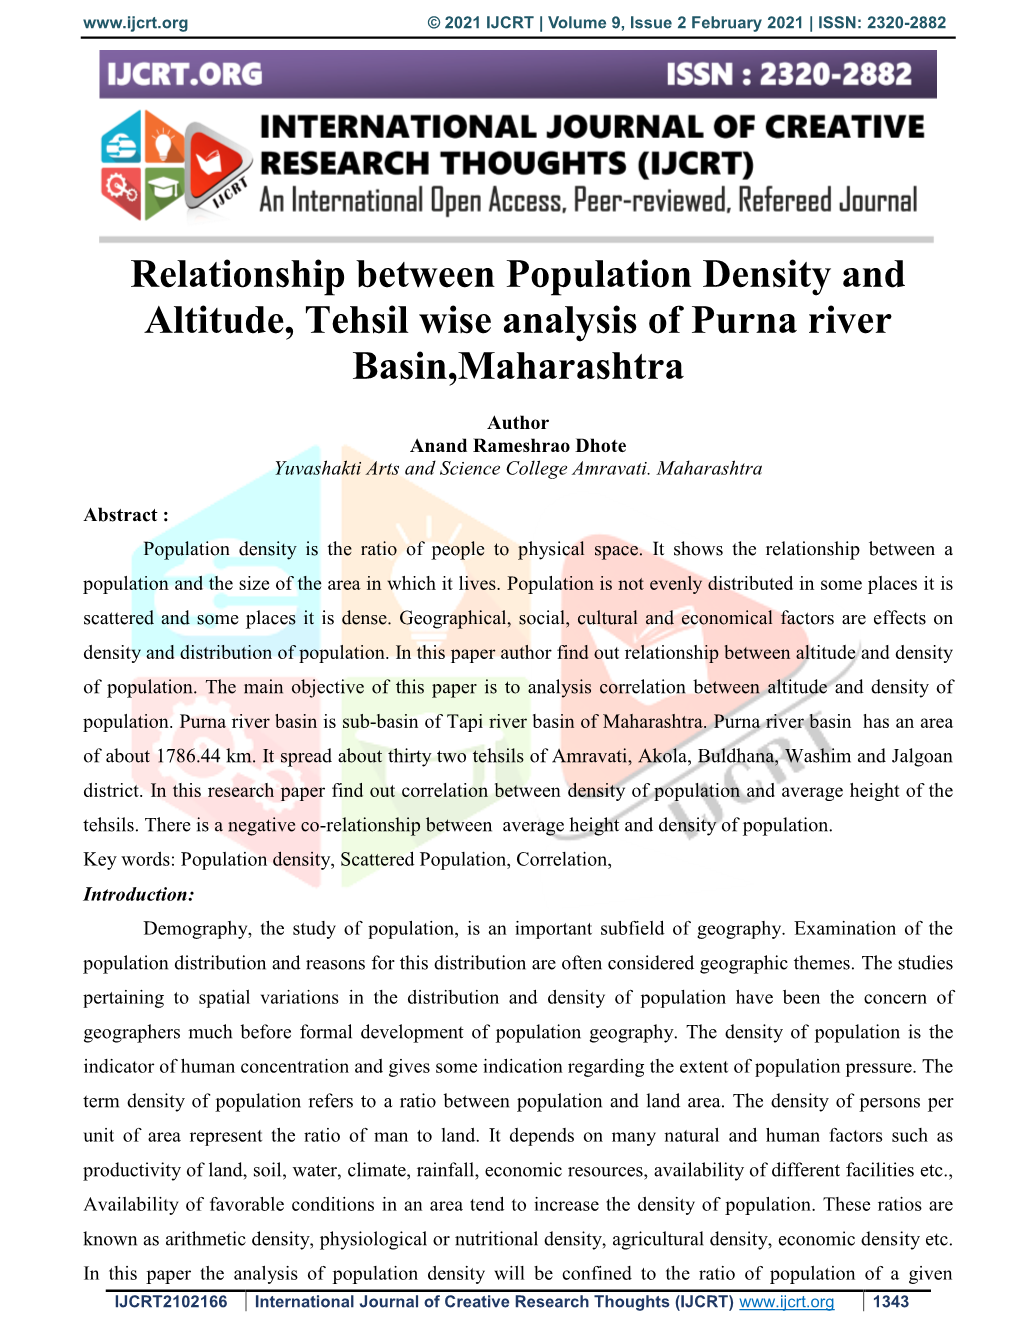 Relationship Between Population Density and Altitude, Tehsil Wise Analysis of Purna River Basin,Maharashtra